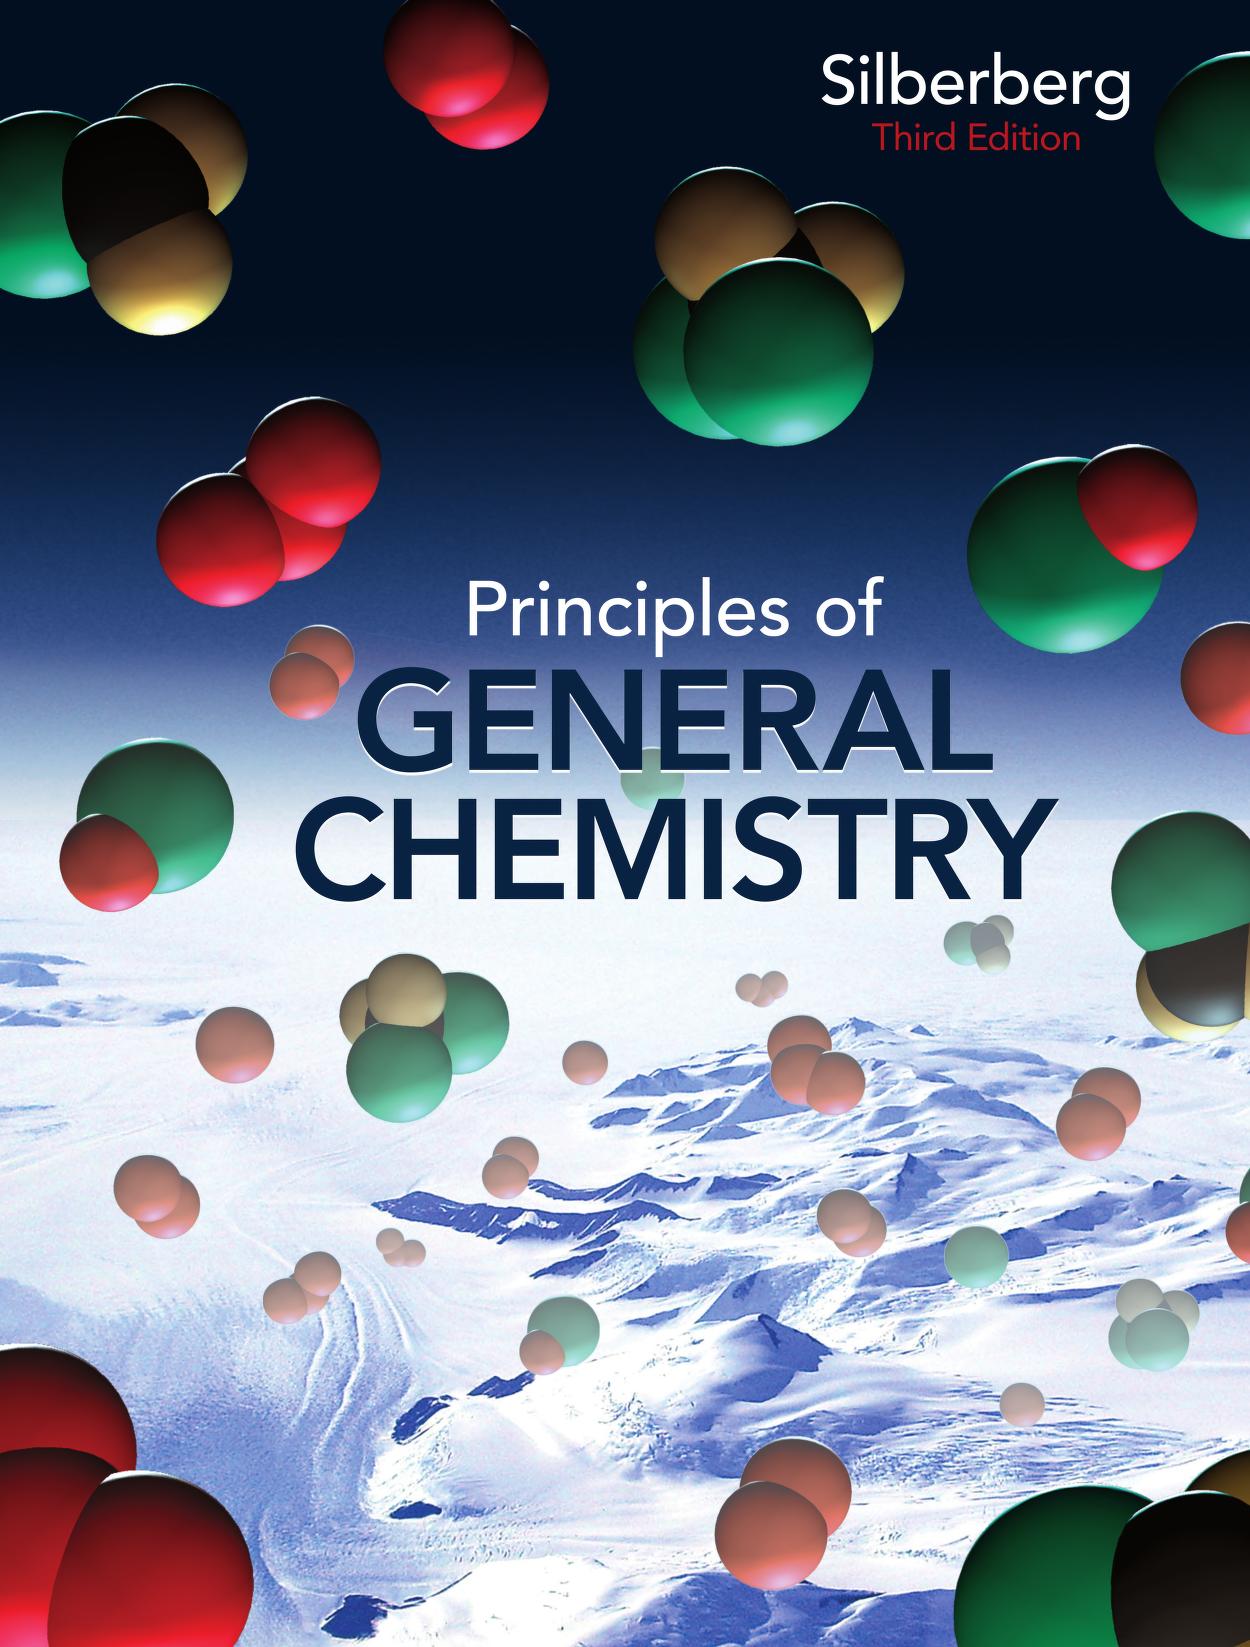 Principles Of General Chemistry (2012) : Martin Silberberg : Free Download,  Borrow, and Streaming : Internet Archive